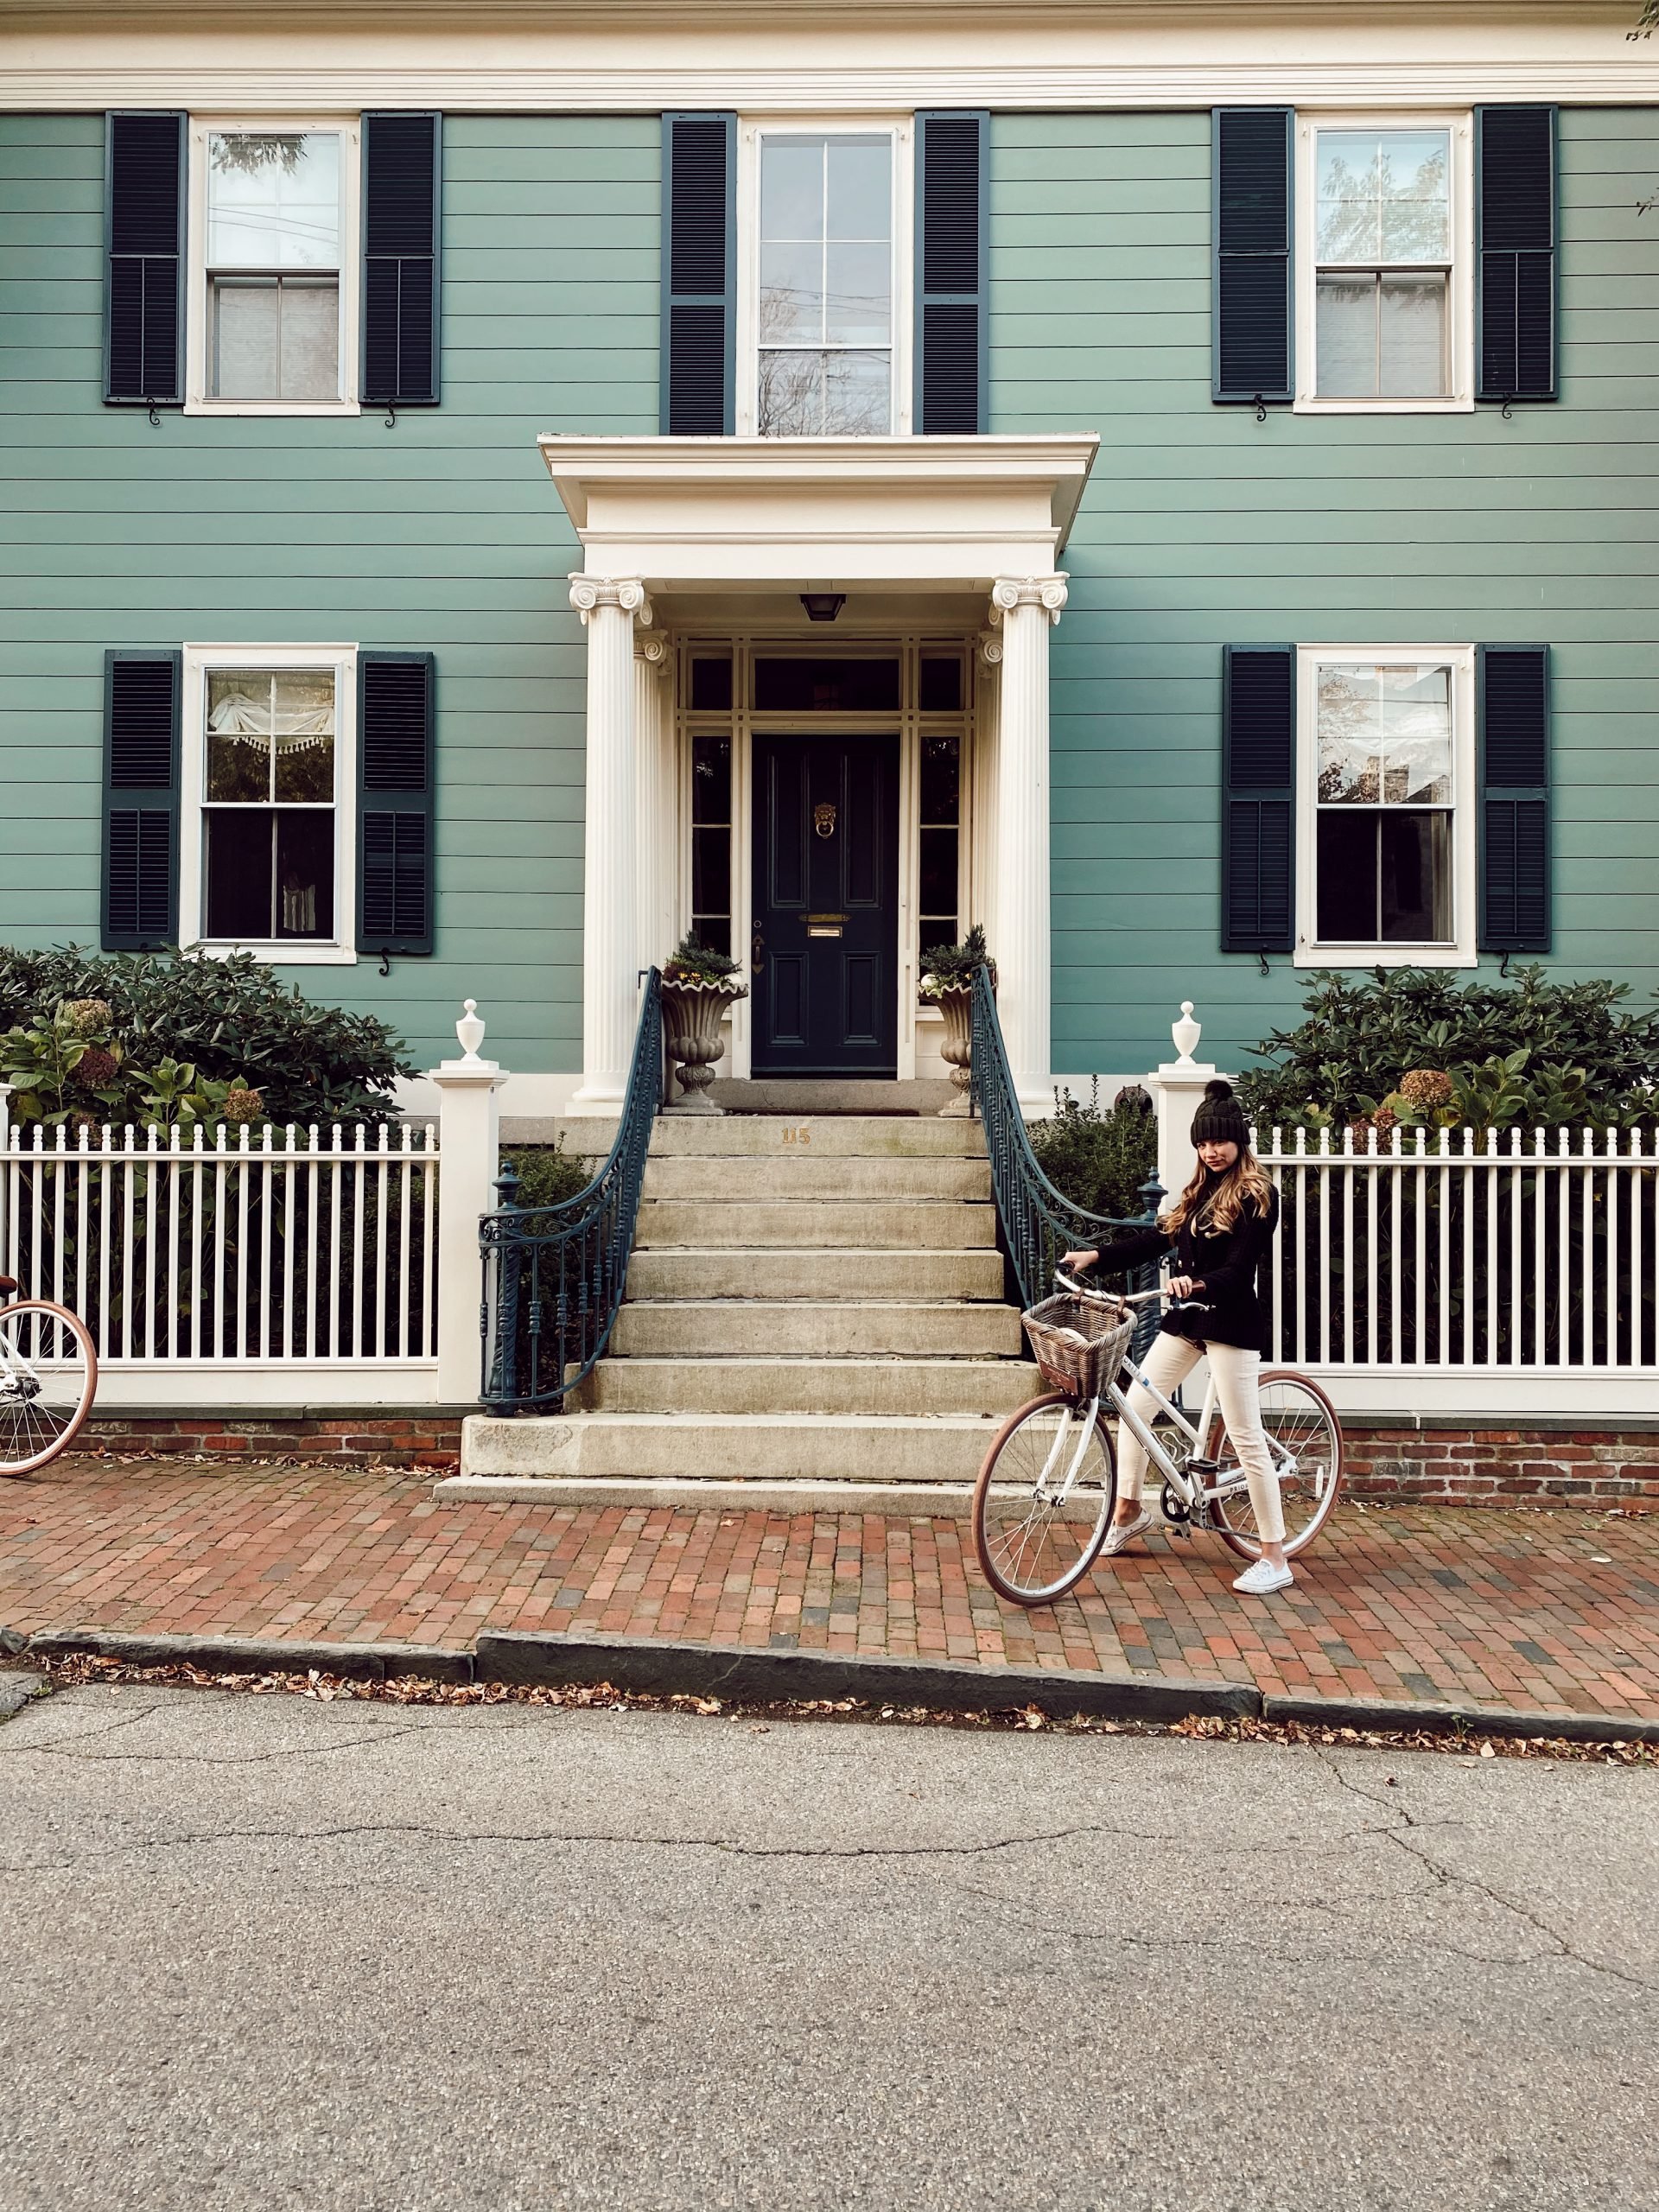 a large sea green historic home with a woman on a bicycle in front of it